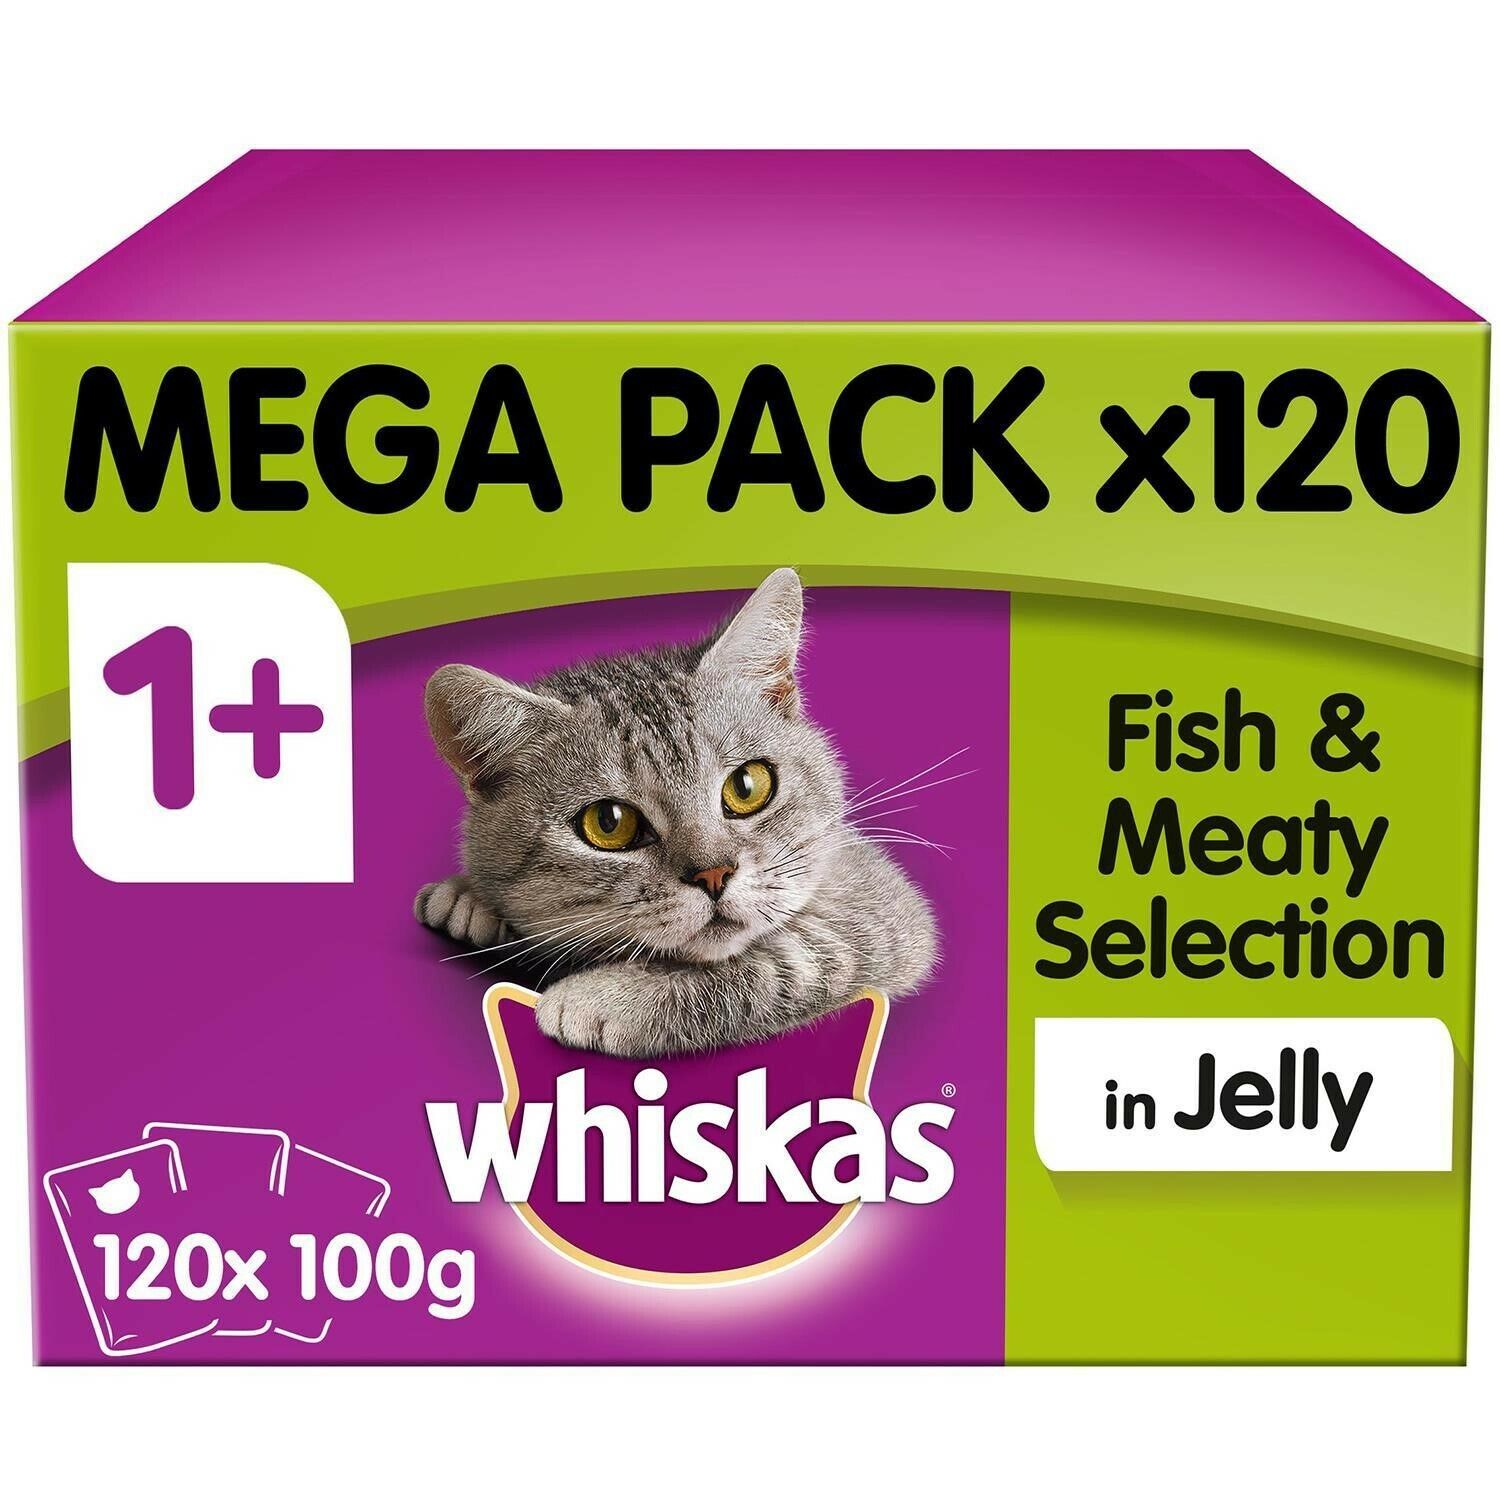 120 x 100g Whiskas Low price 1+ Adult Wet Pouches Mixed Fish Me Cat & Charlotte Mall Food